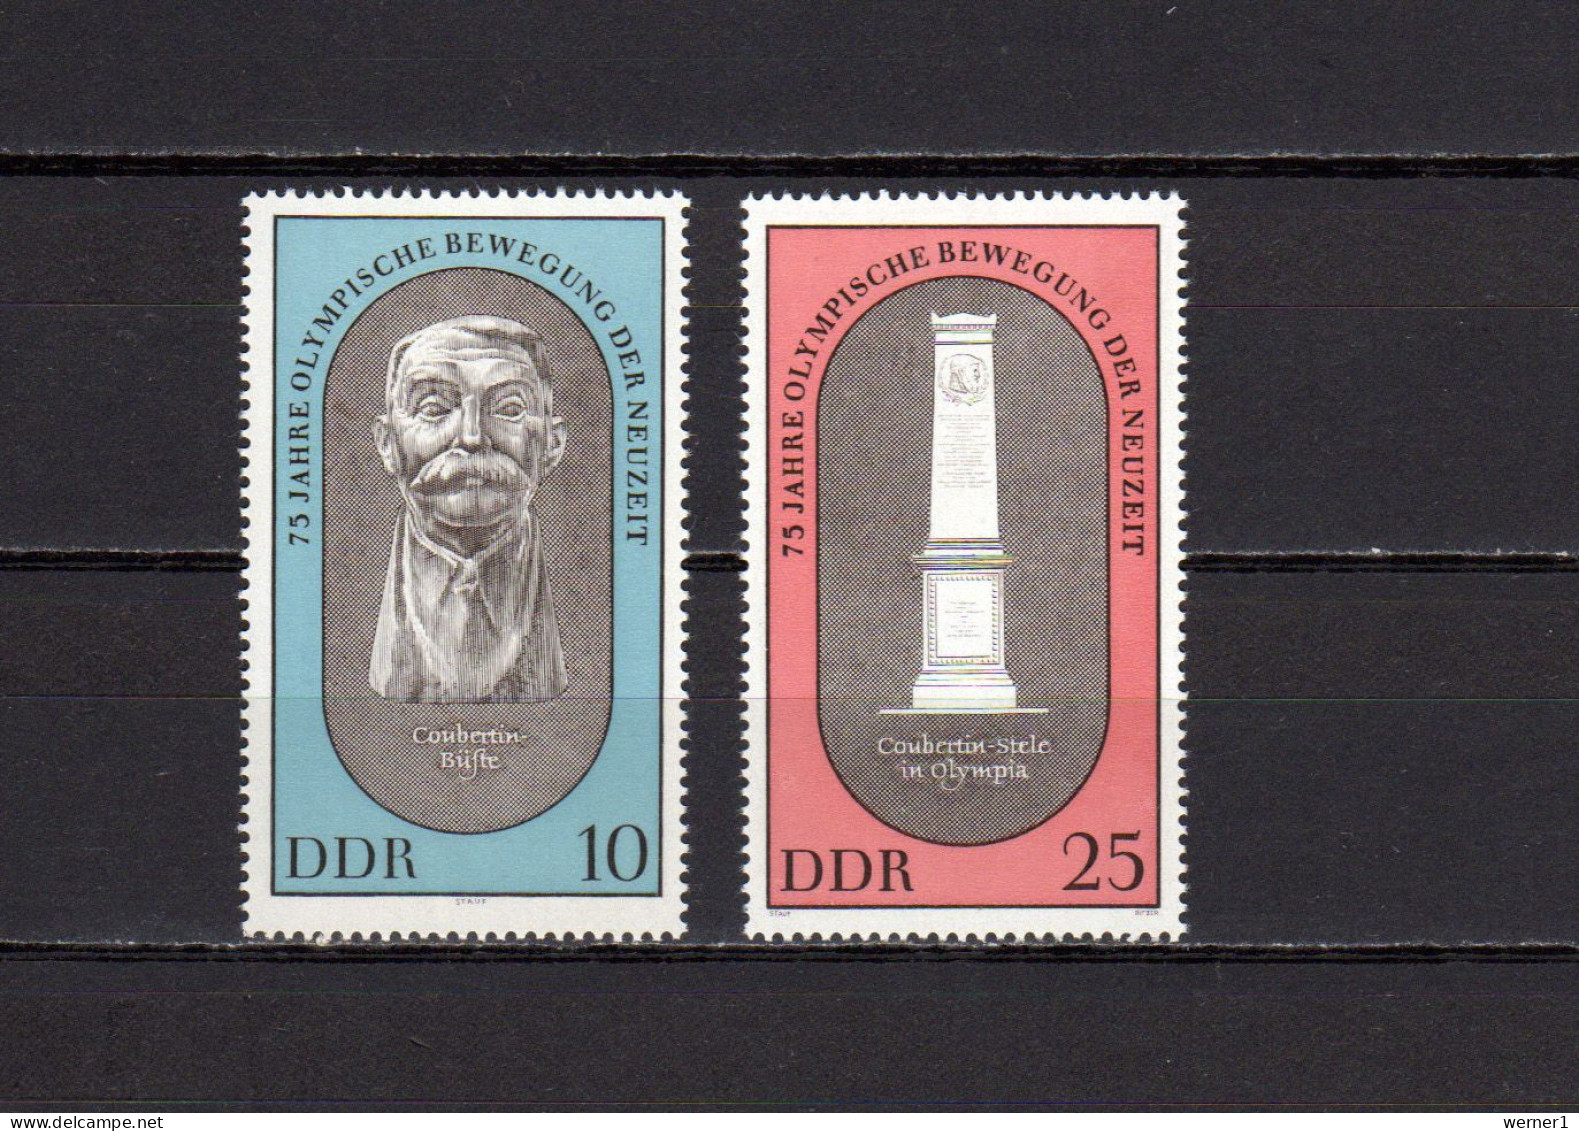 DDR 1969 Olympic Games Set Of 2 MNH - Sommer 1972: München